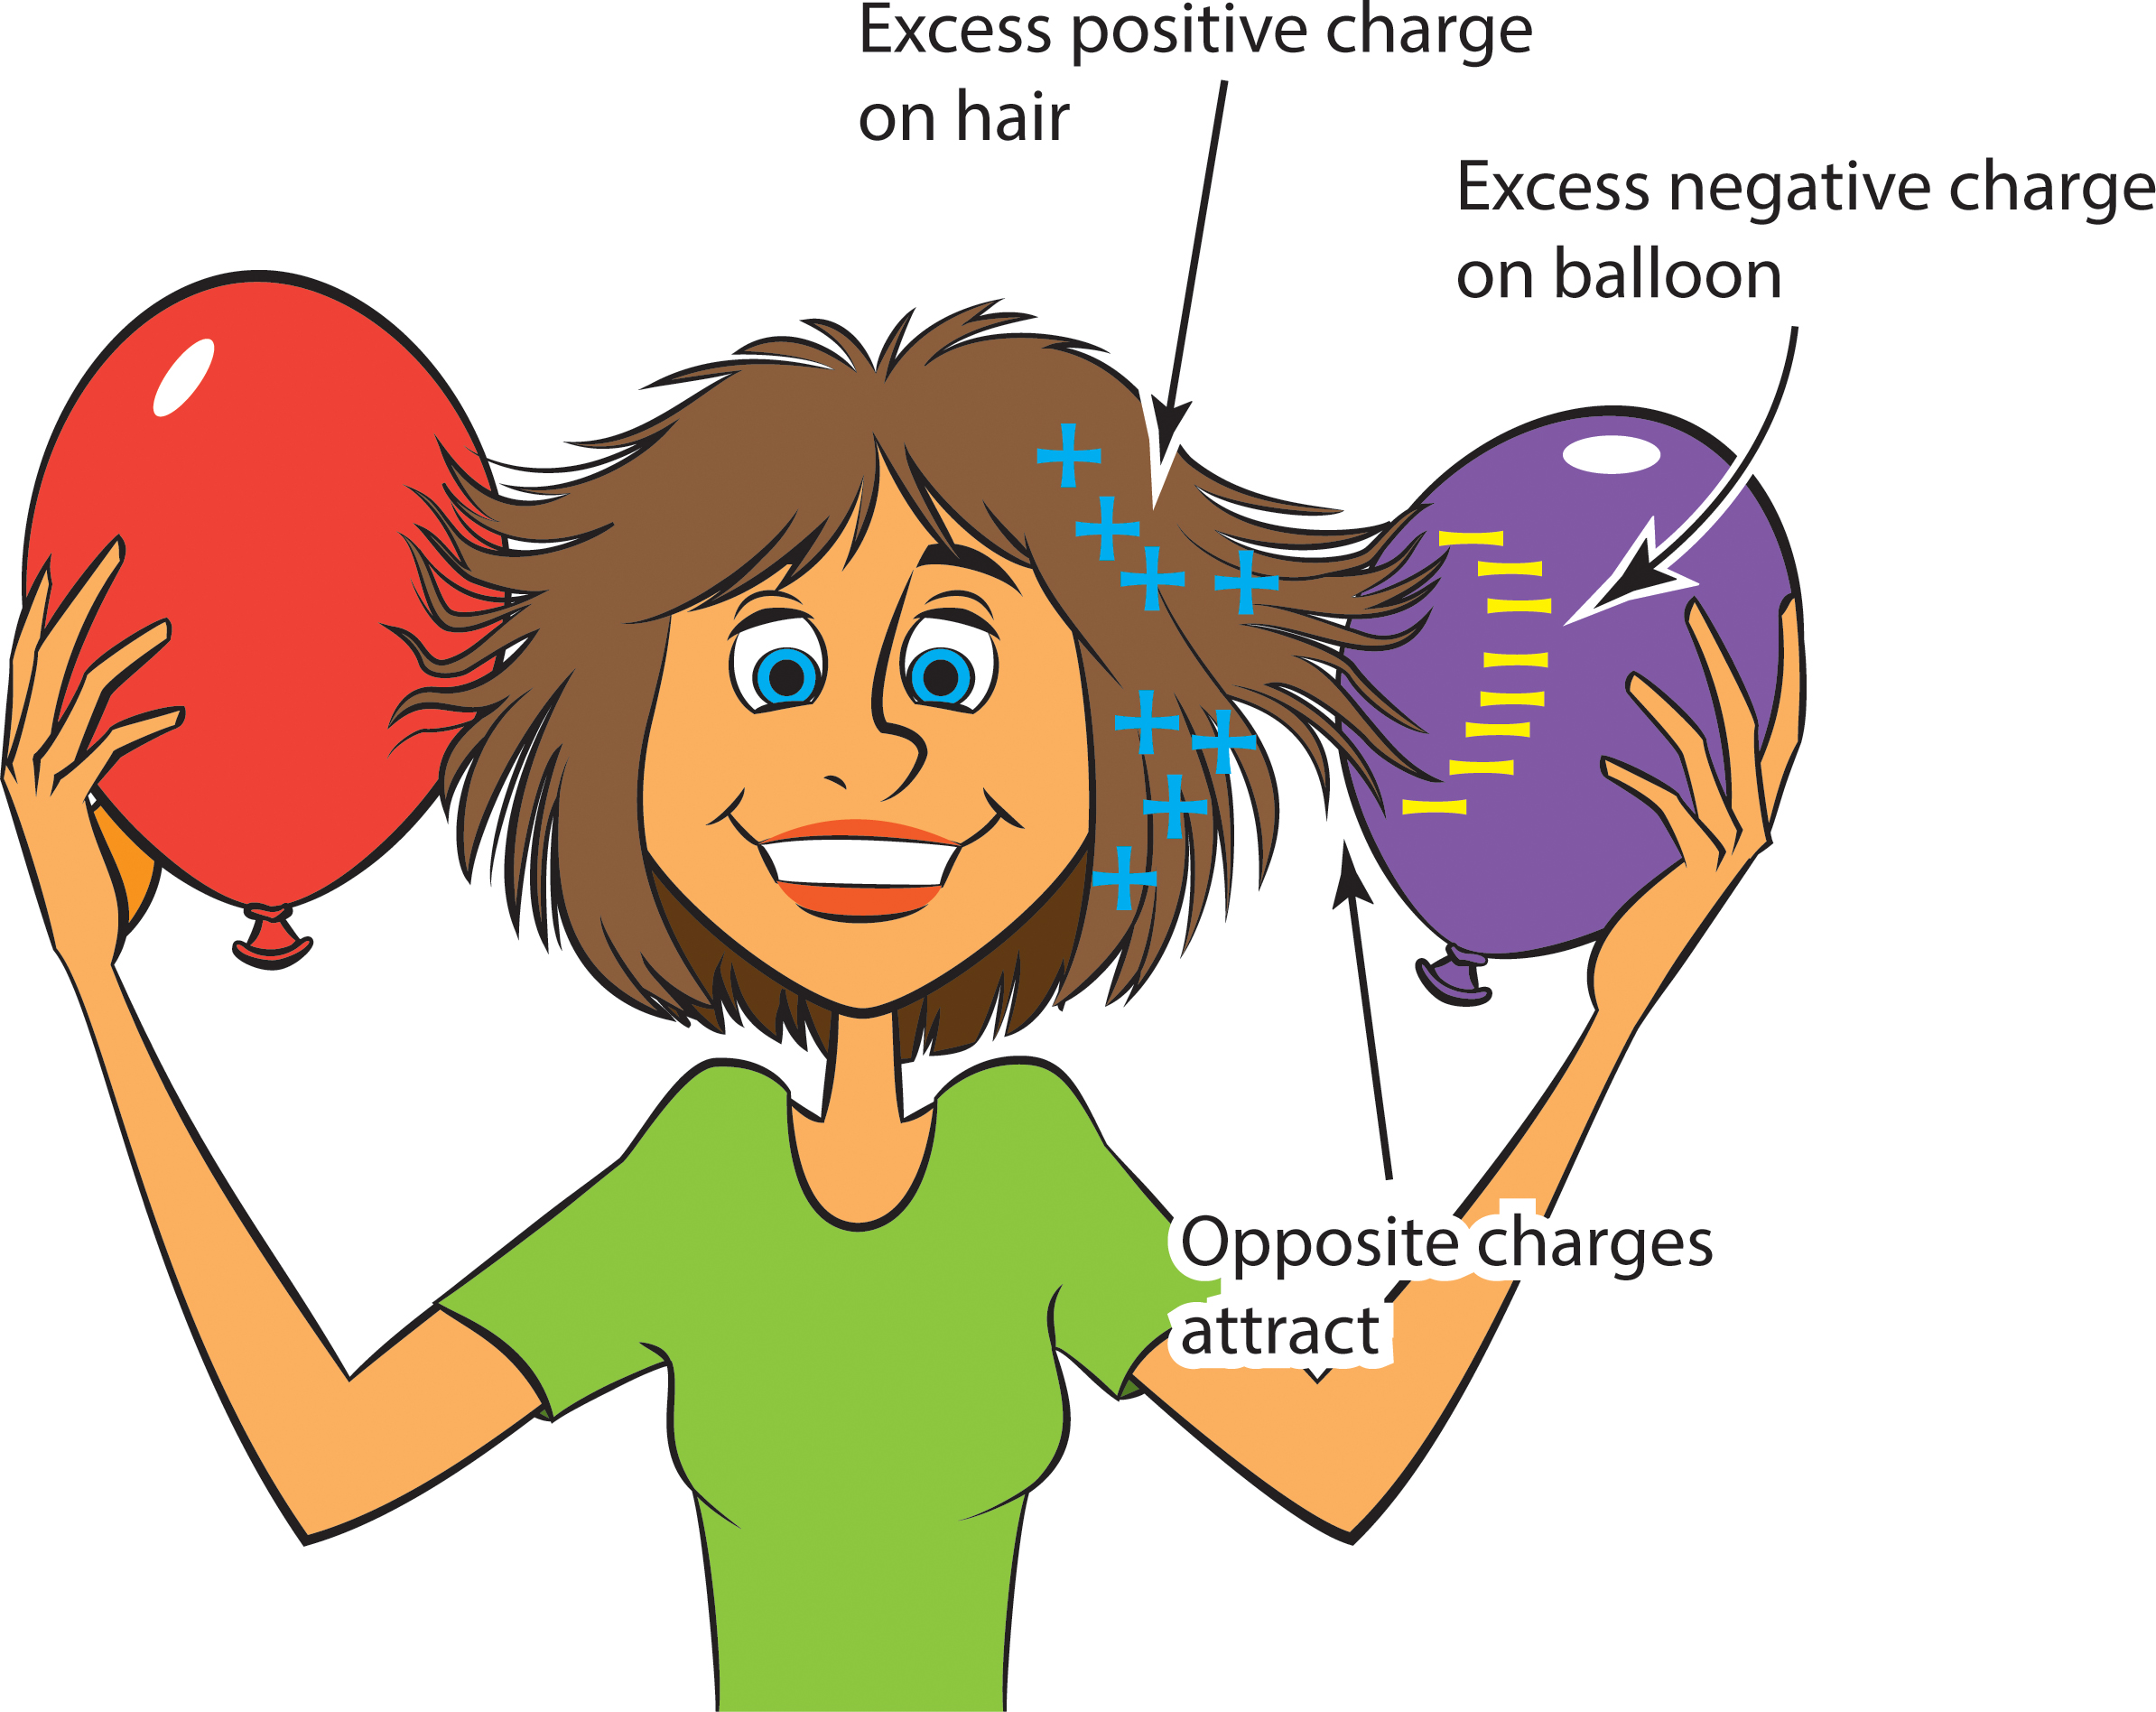 static electricity experiments with balloons